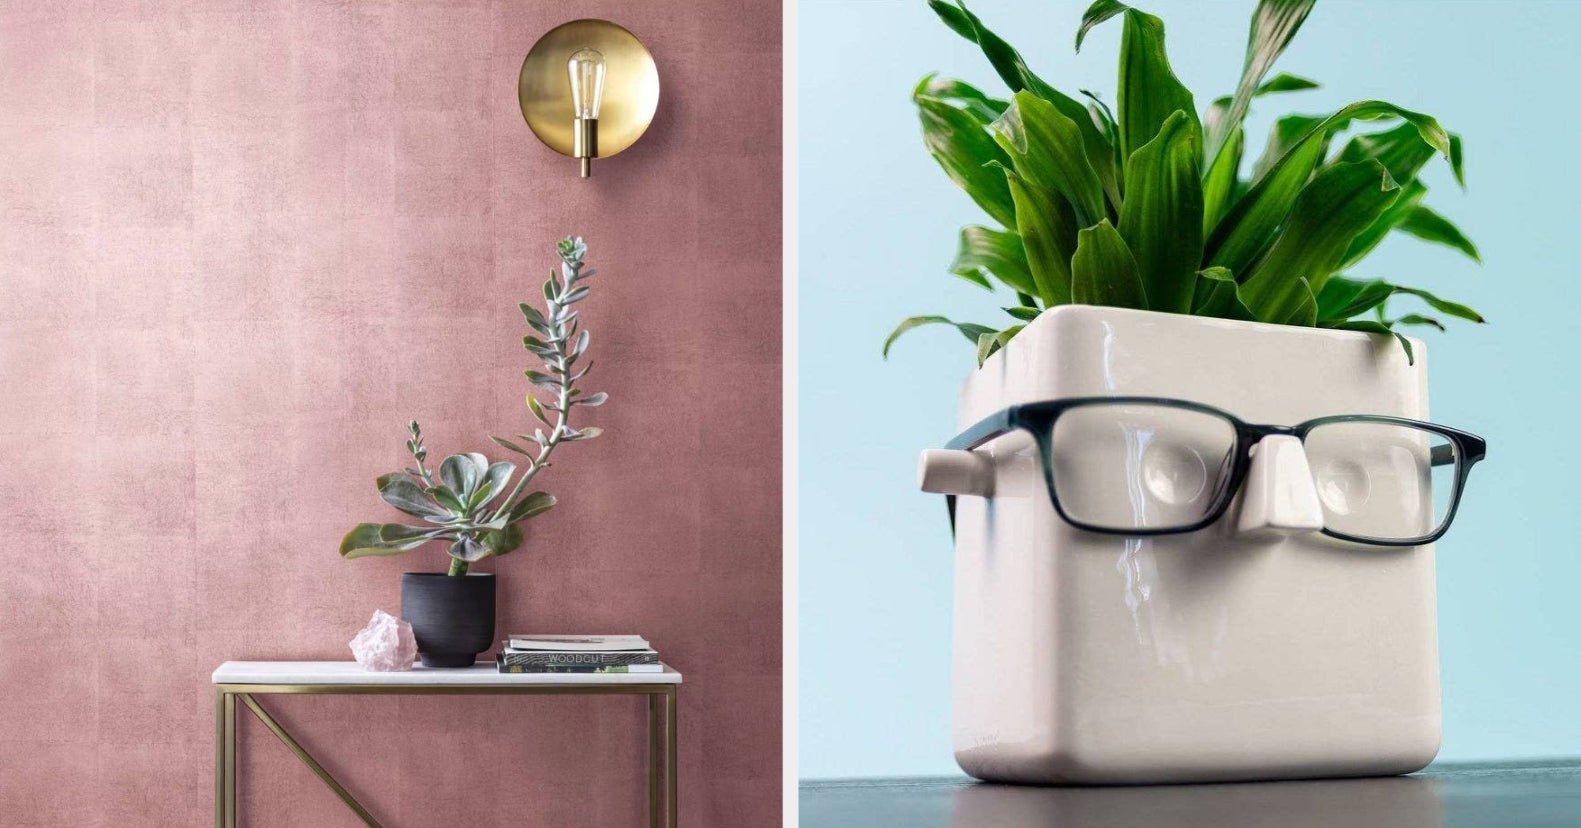 Just 31 Things Under $50 From Target You'll Want To Buy For Your Home